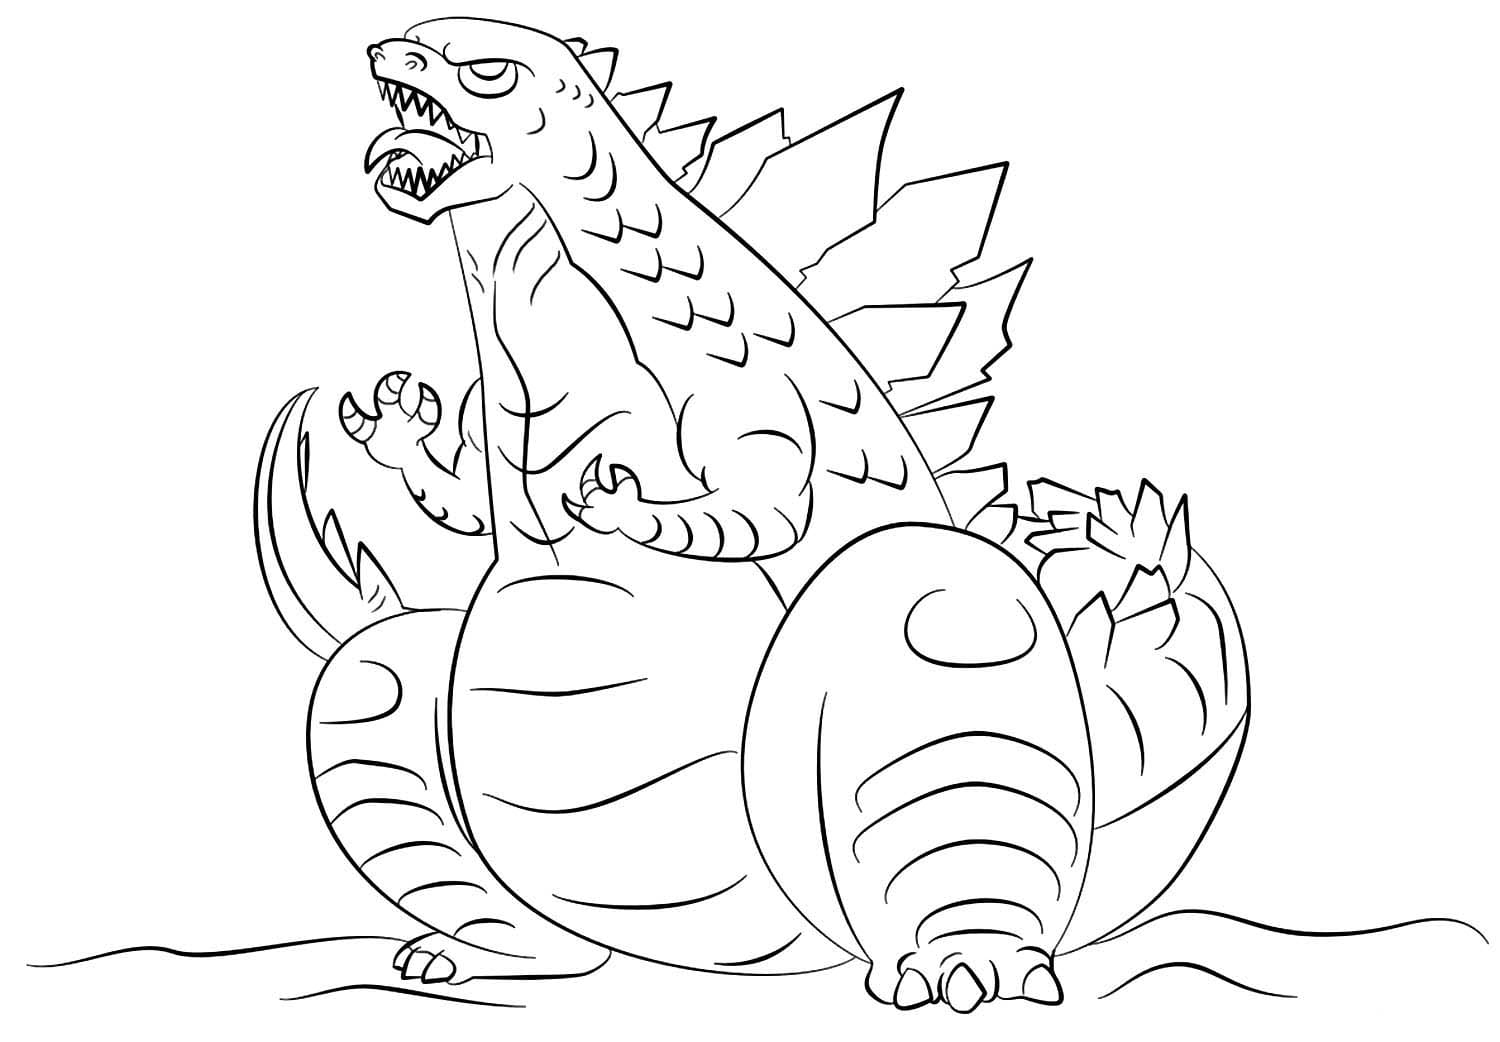 Coloring page Godzilla for children 6-7 years old